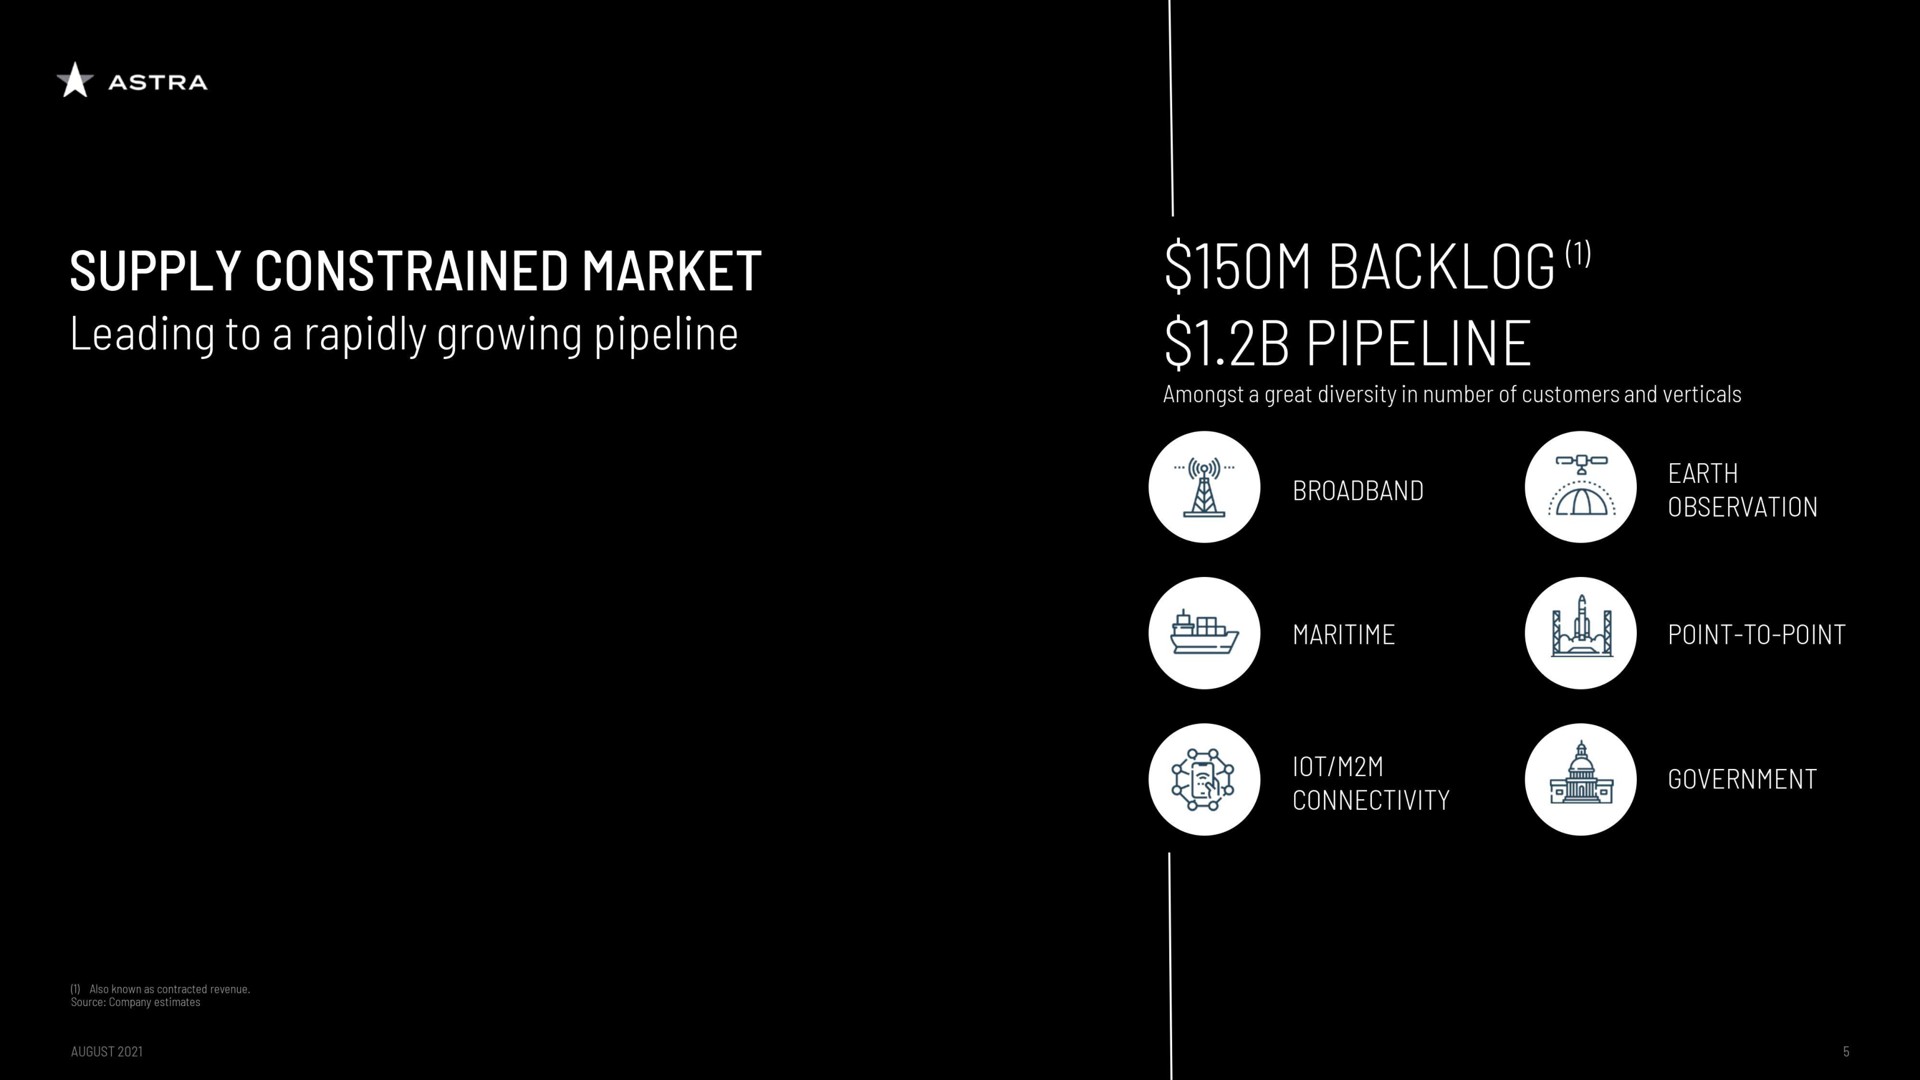 do leading to a rapidly growing pipeline me pipeline | Astra